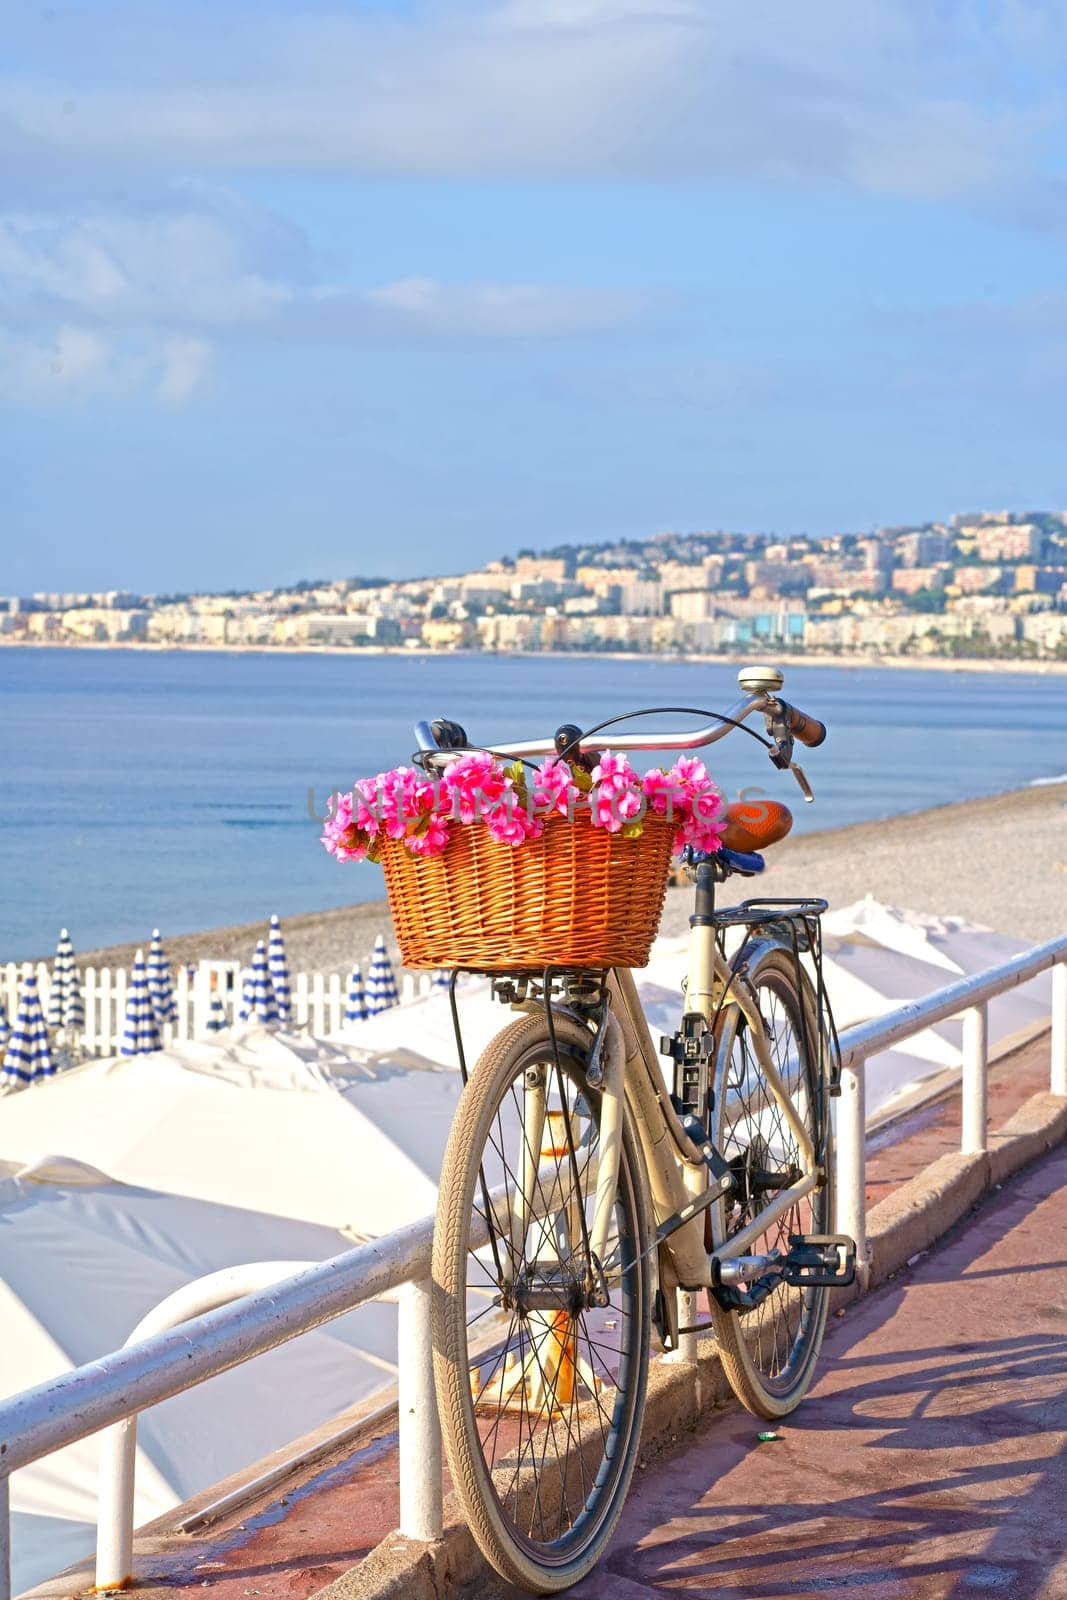 France. Nice. Bicycle with a beautiful basket filled with pink flowers in front of the sea by aprilphoto